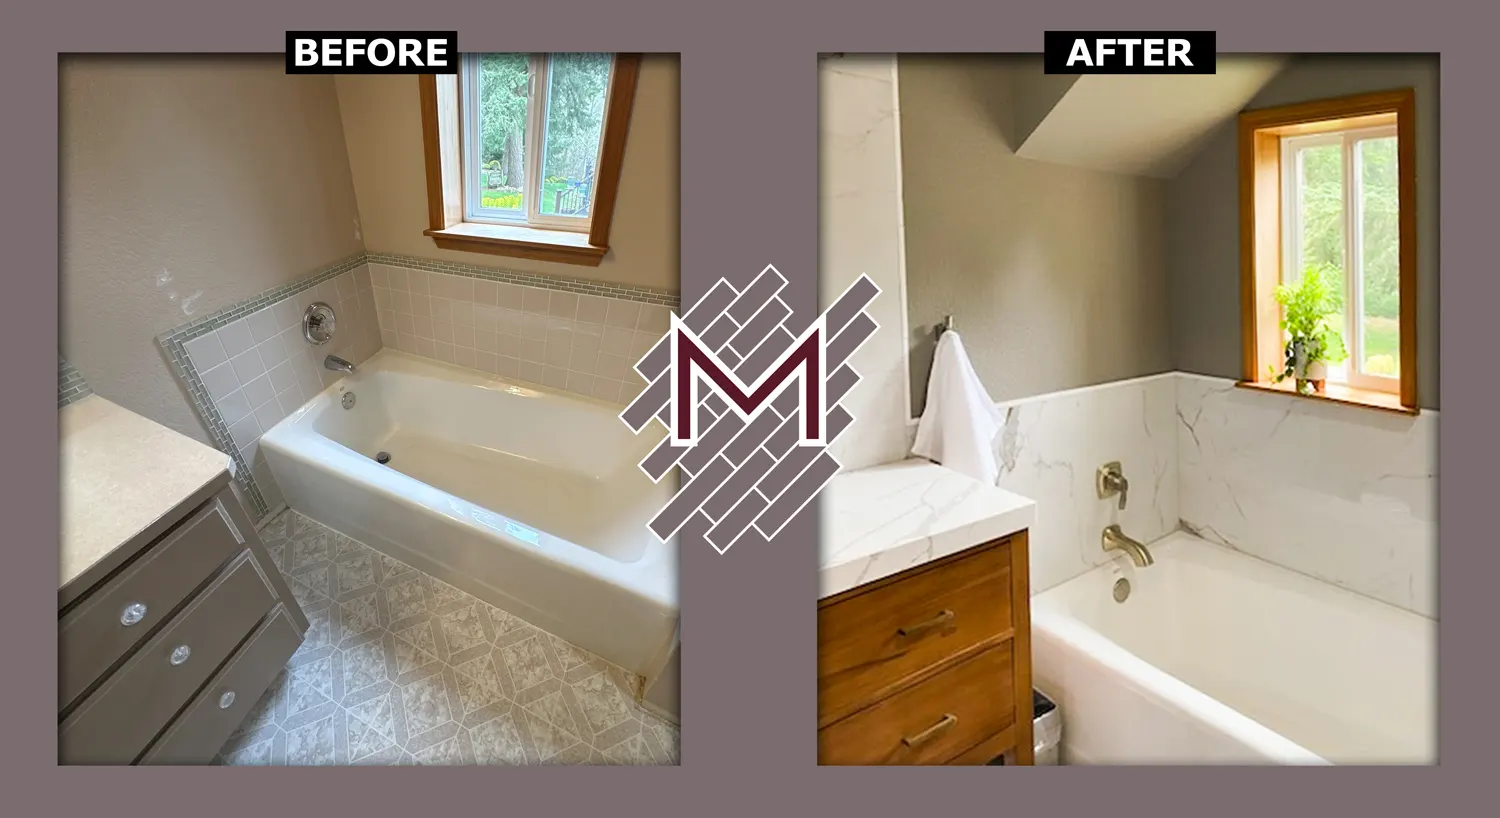 Before and After. Rossalini Polished Porcelain Bathroom Tile Wall and Flooring Installation By Modern Flooring Services.